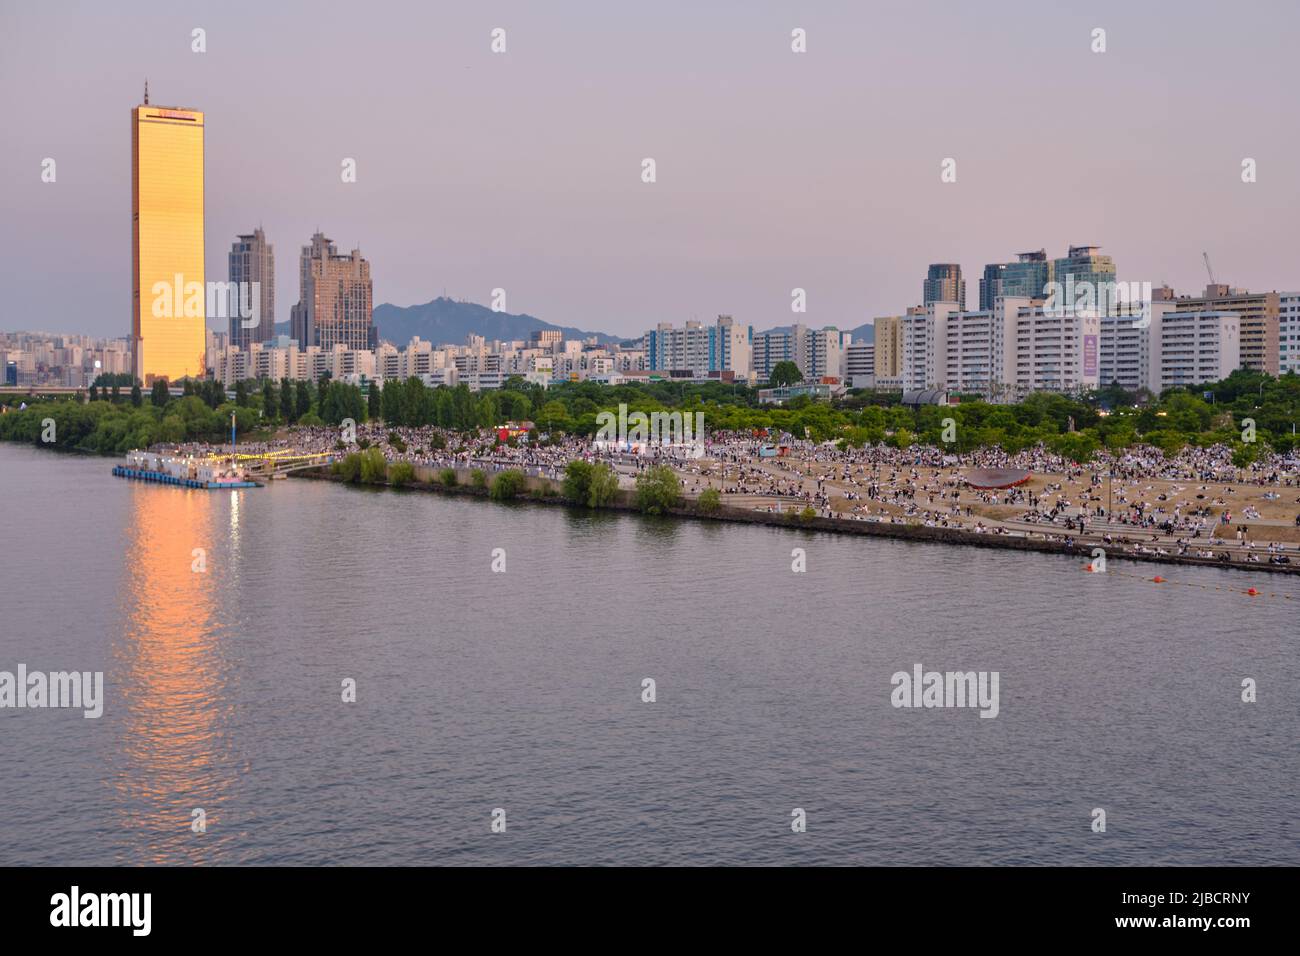 Dusk view of Han River and skyscrapers in Yeouido in Seoul, South Korea on 31 May 2022 Stock Photo